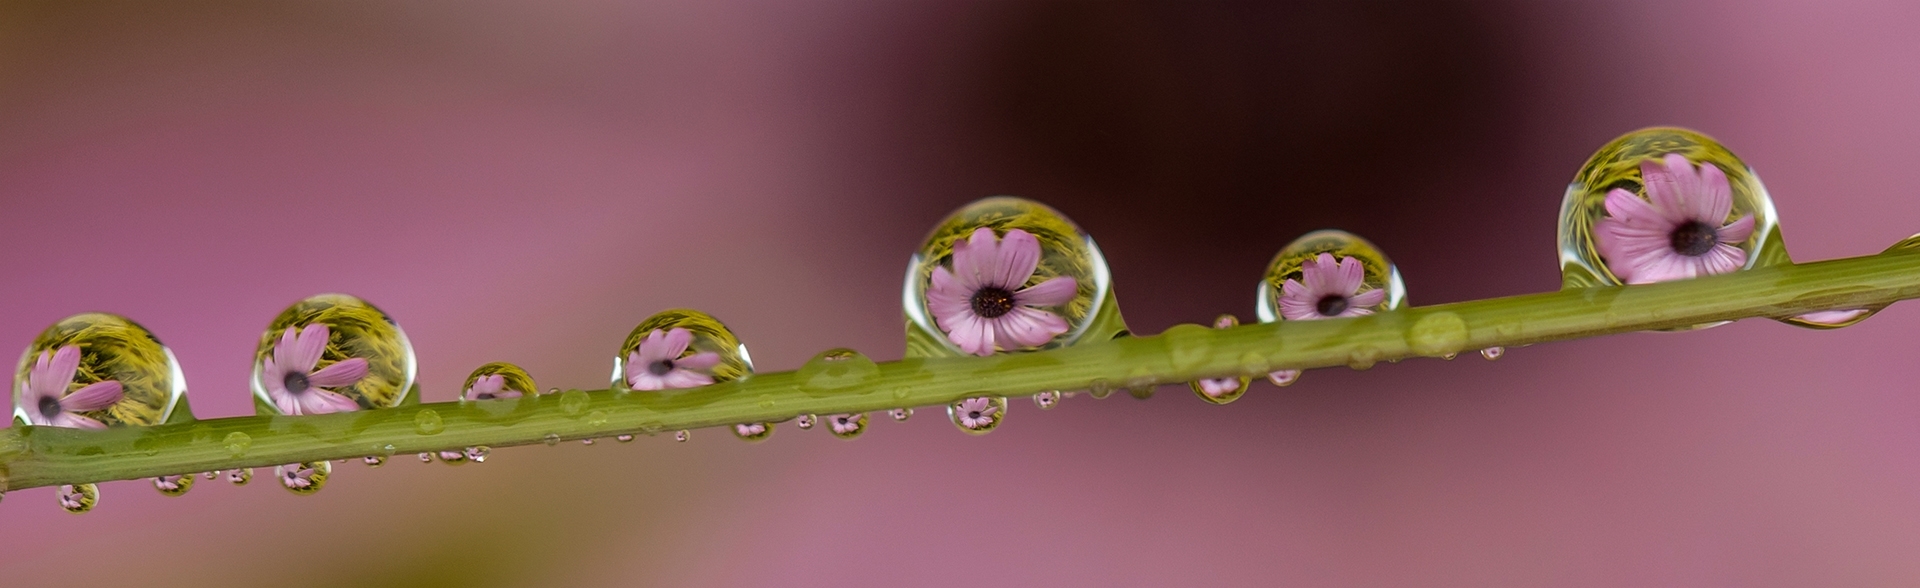 Many-reflections-of-a-single-flower-CB-1-Place-by-Lindsay-Puddicombe-BK